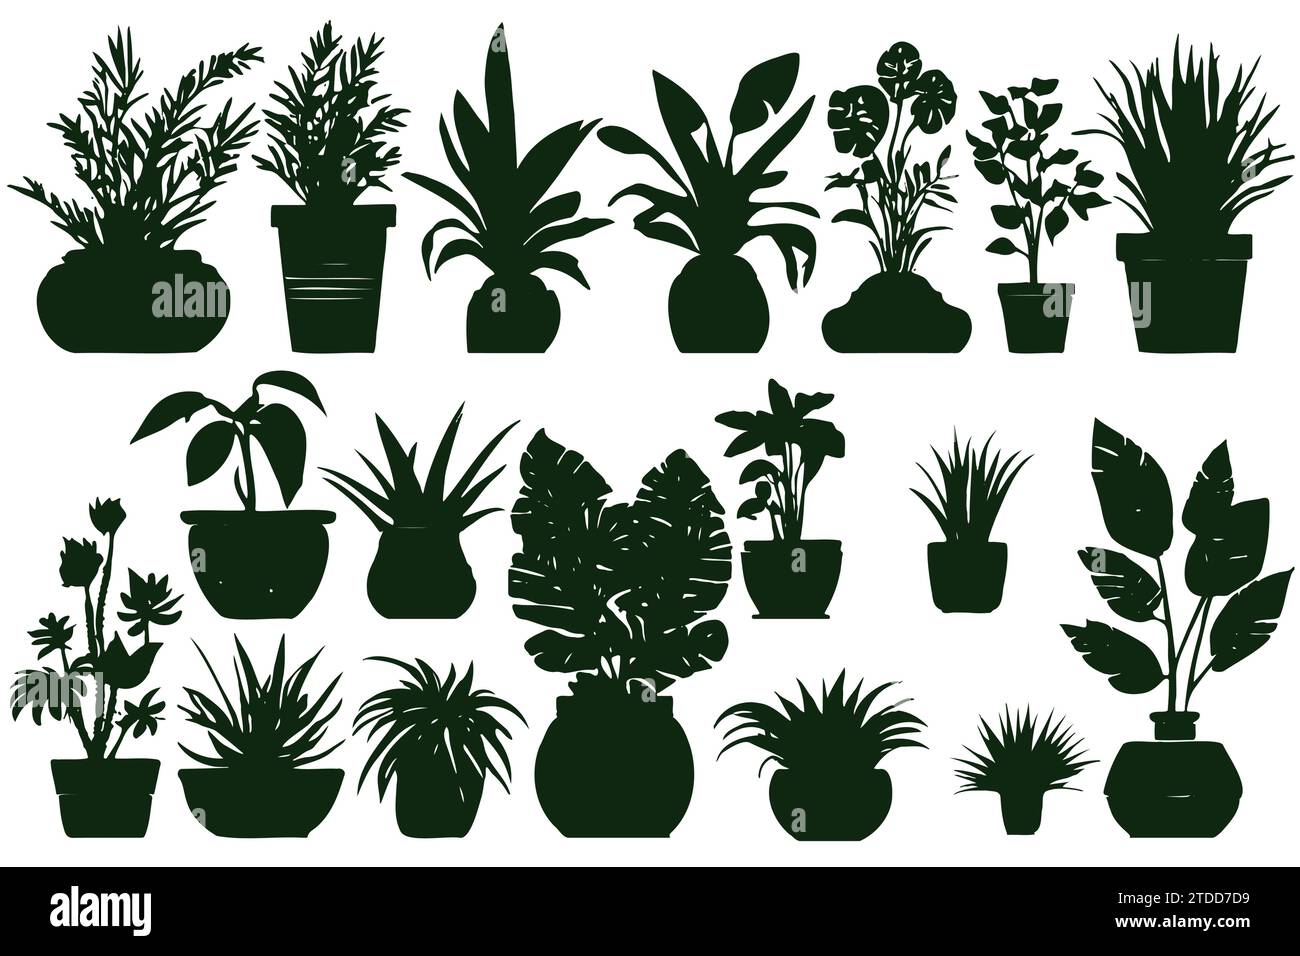 Collection silhouettes houseplants. Potted plants isolated on white. Set green tropical plants. Trendy home decor with indoor plants, planters Stock Vector